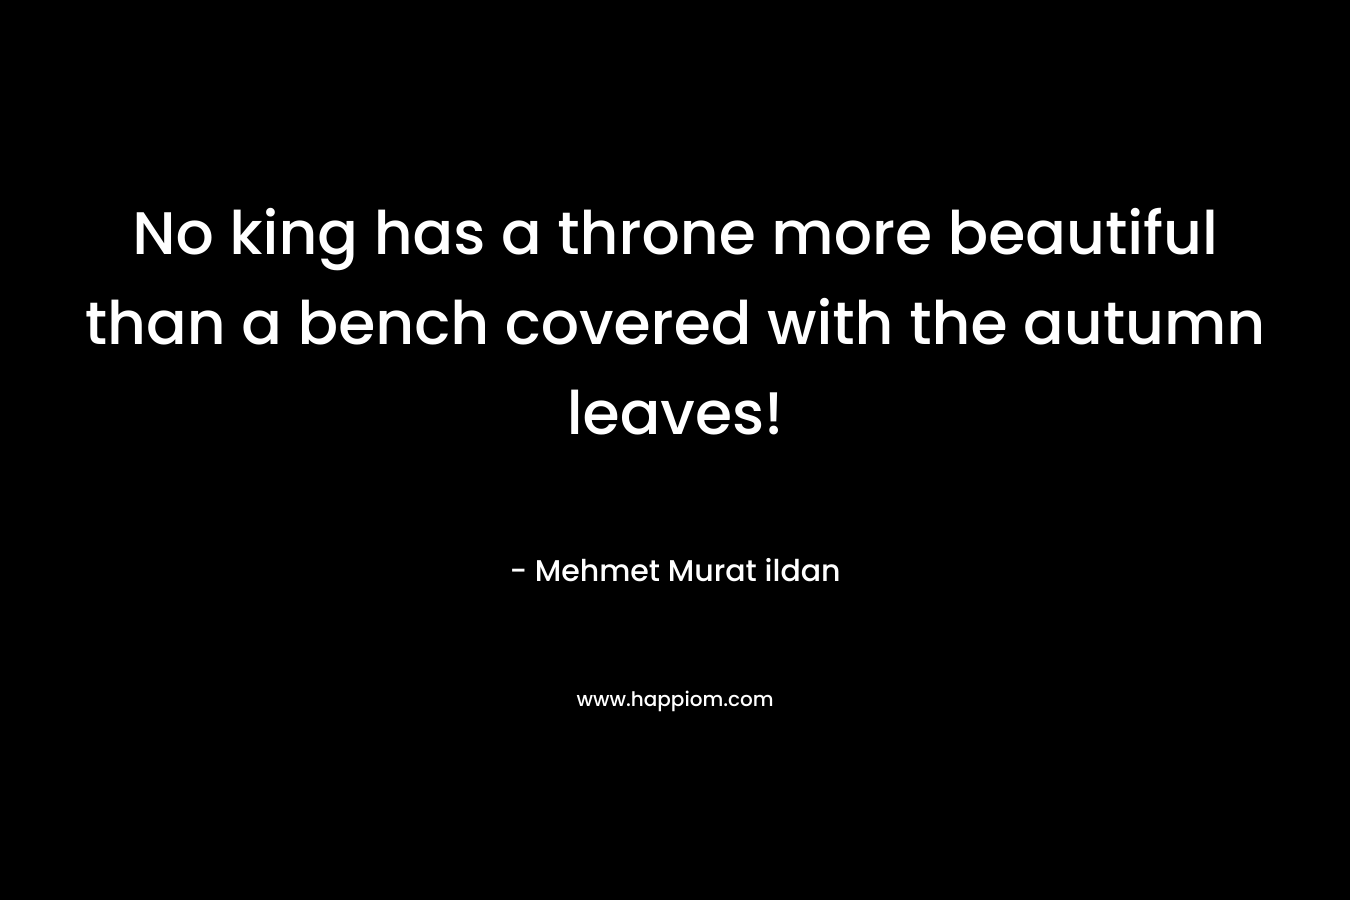 No king has a throne more beautiful than a bench covered with the autumn leaves! – Mehmet Murat ildan